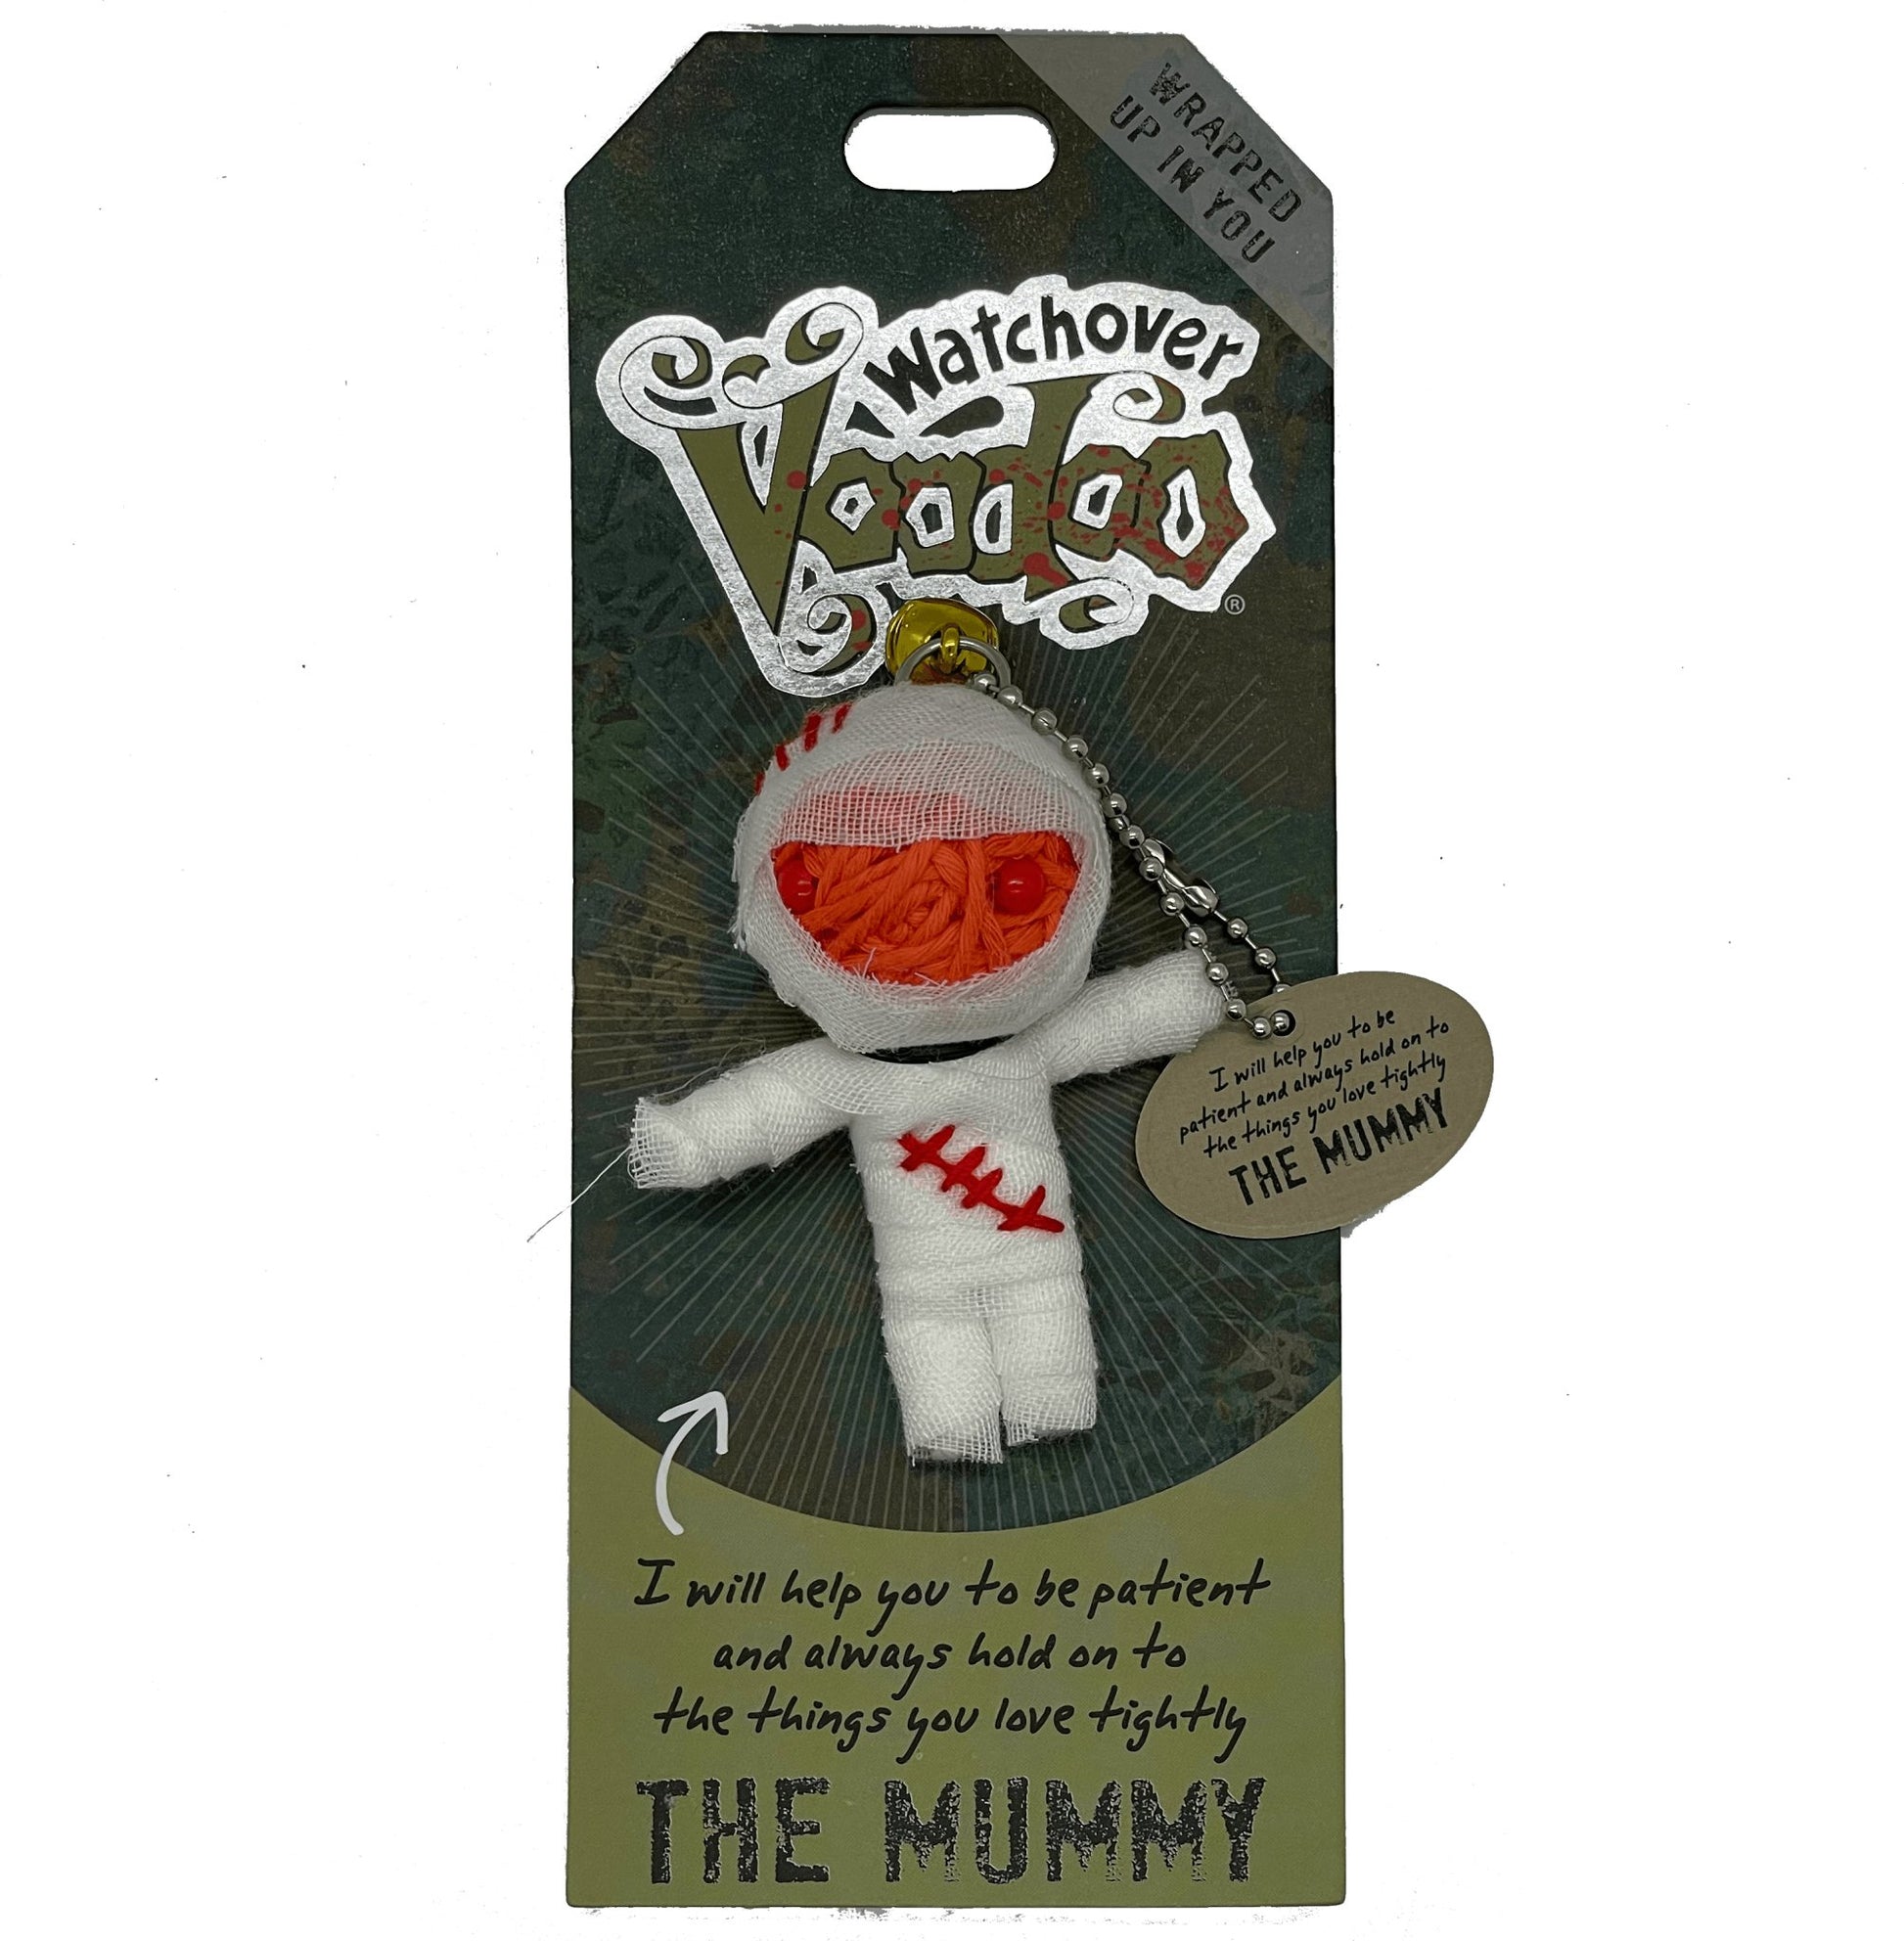 Watchover Voodoo Doll - The Mummy - Watchover Voodoo - String Doll